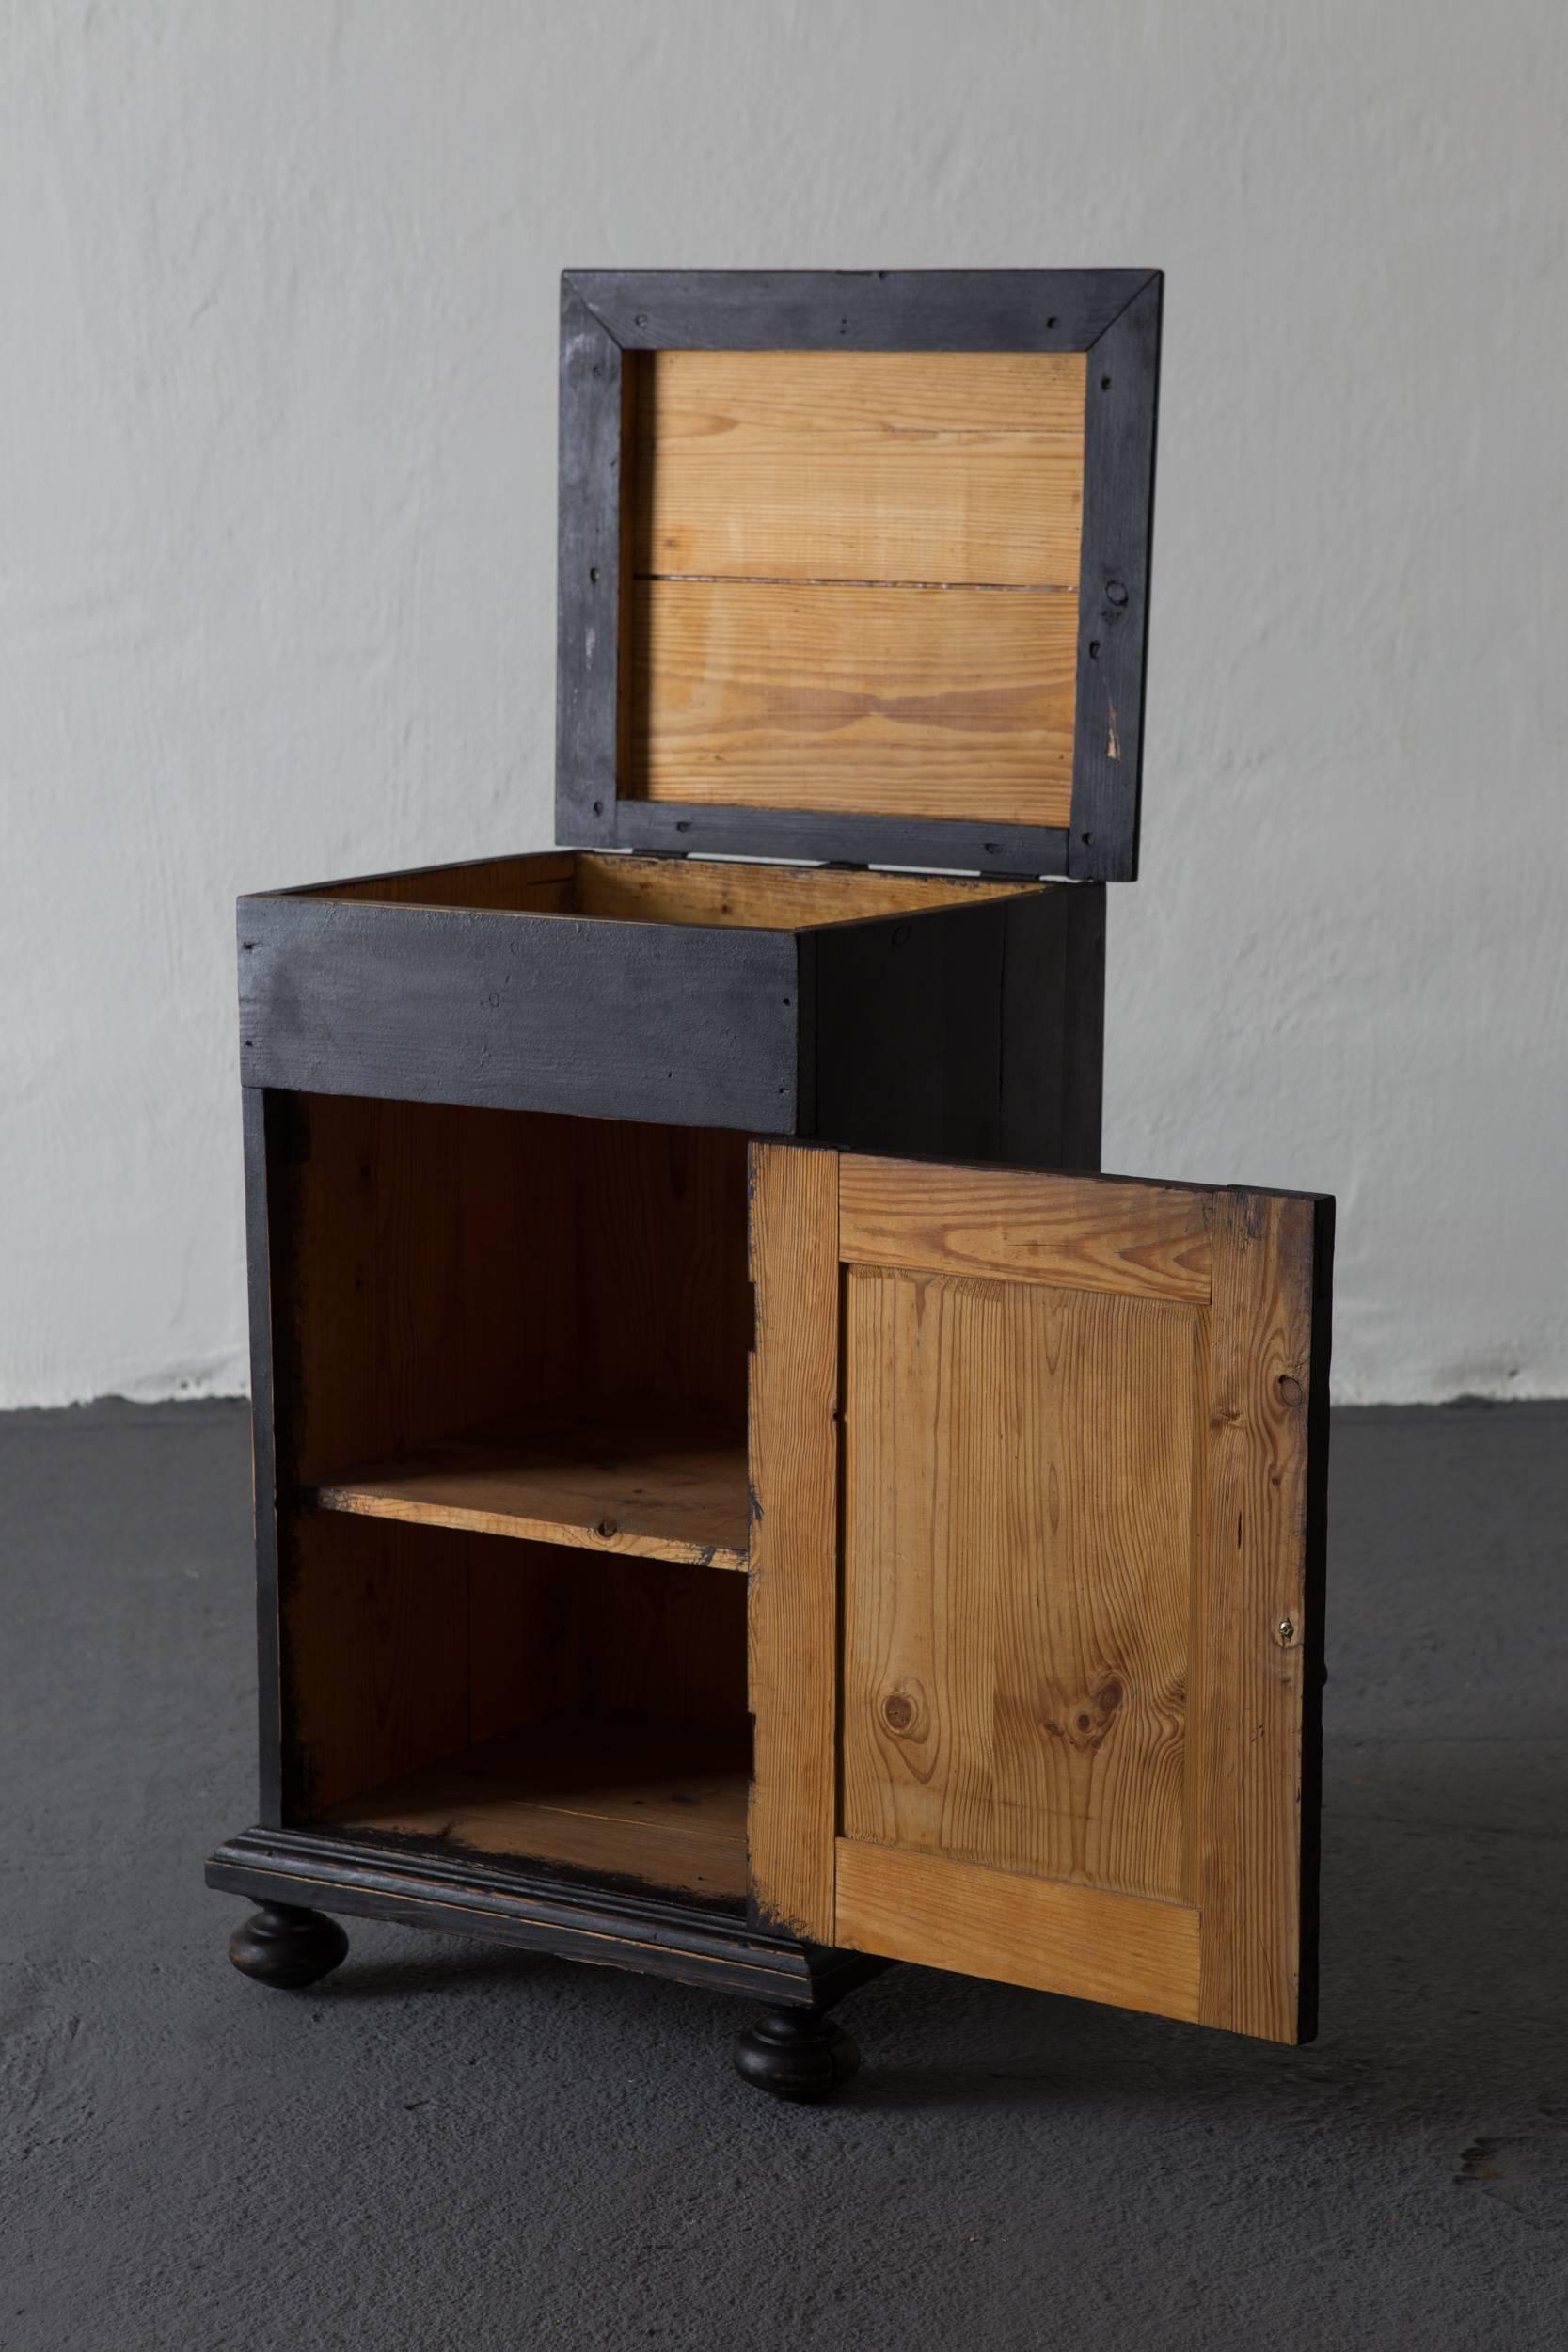 Nightstand, Swedish, 19th century. A small cupboard made in Sweden during the 19th century, circa 1880. Painted in our Laserow black. New hardware. Interior with a shelf.